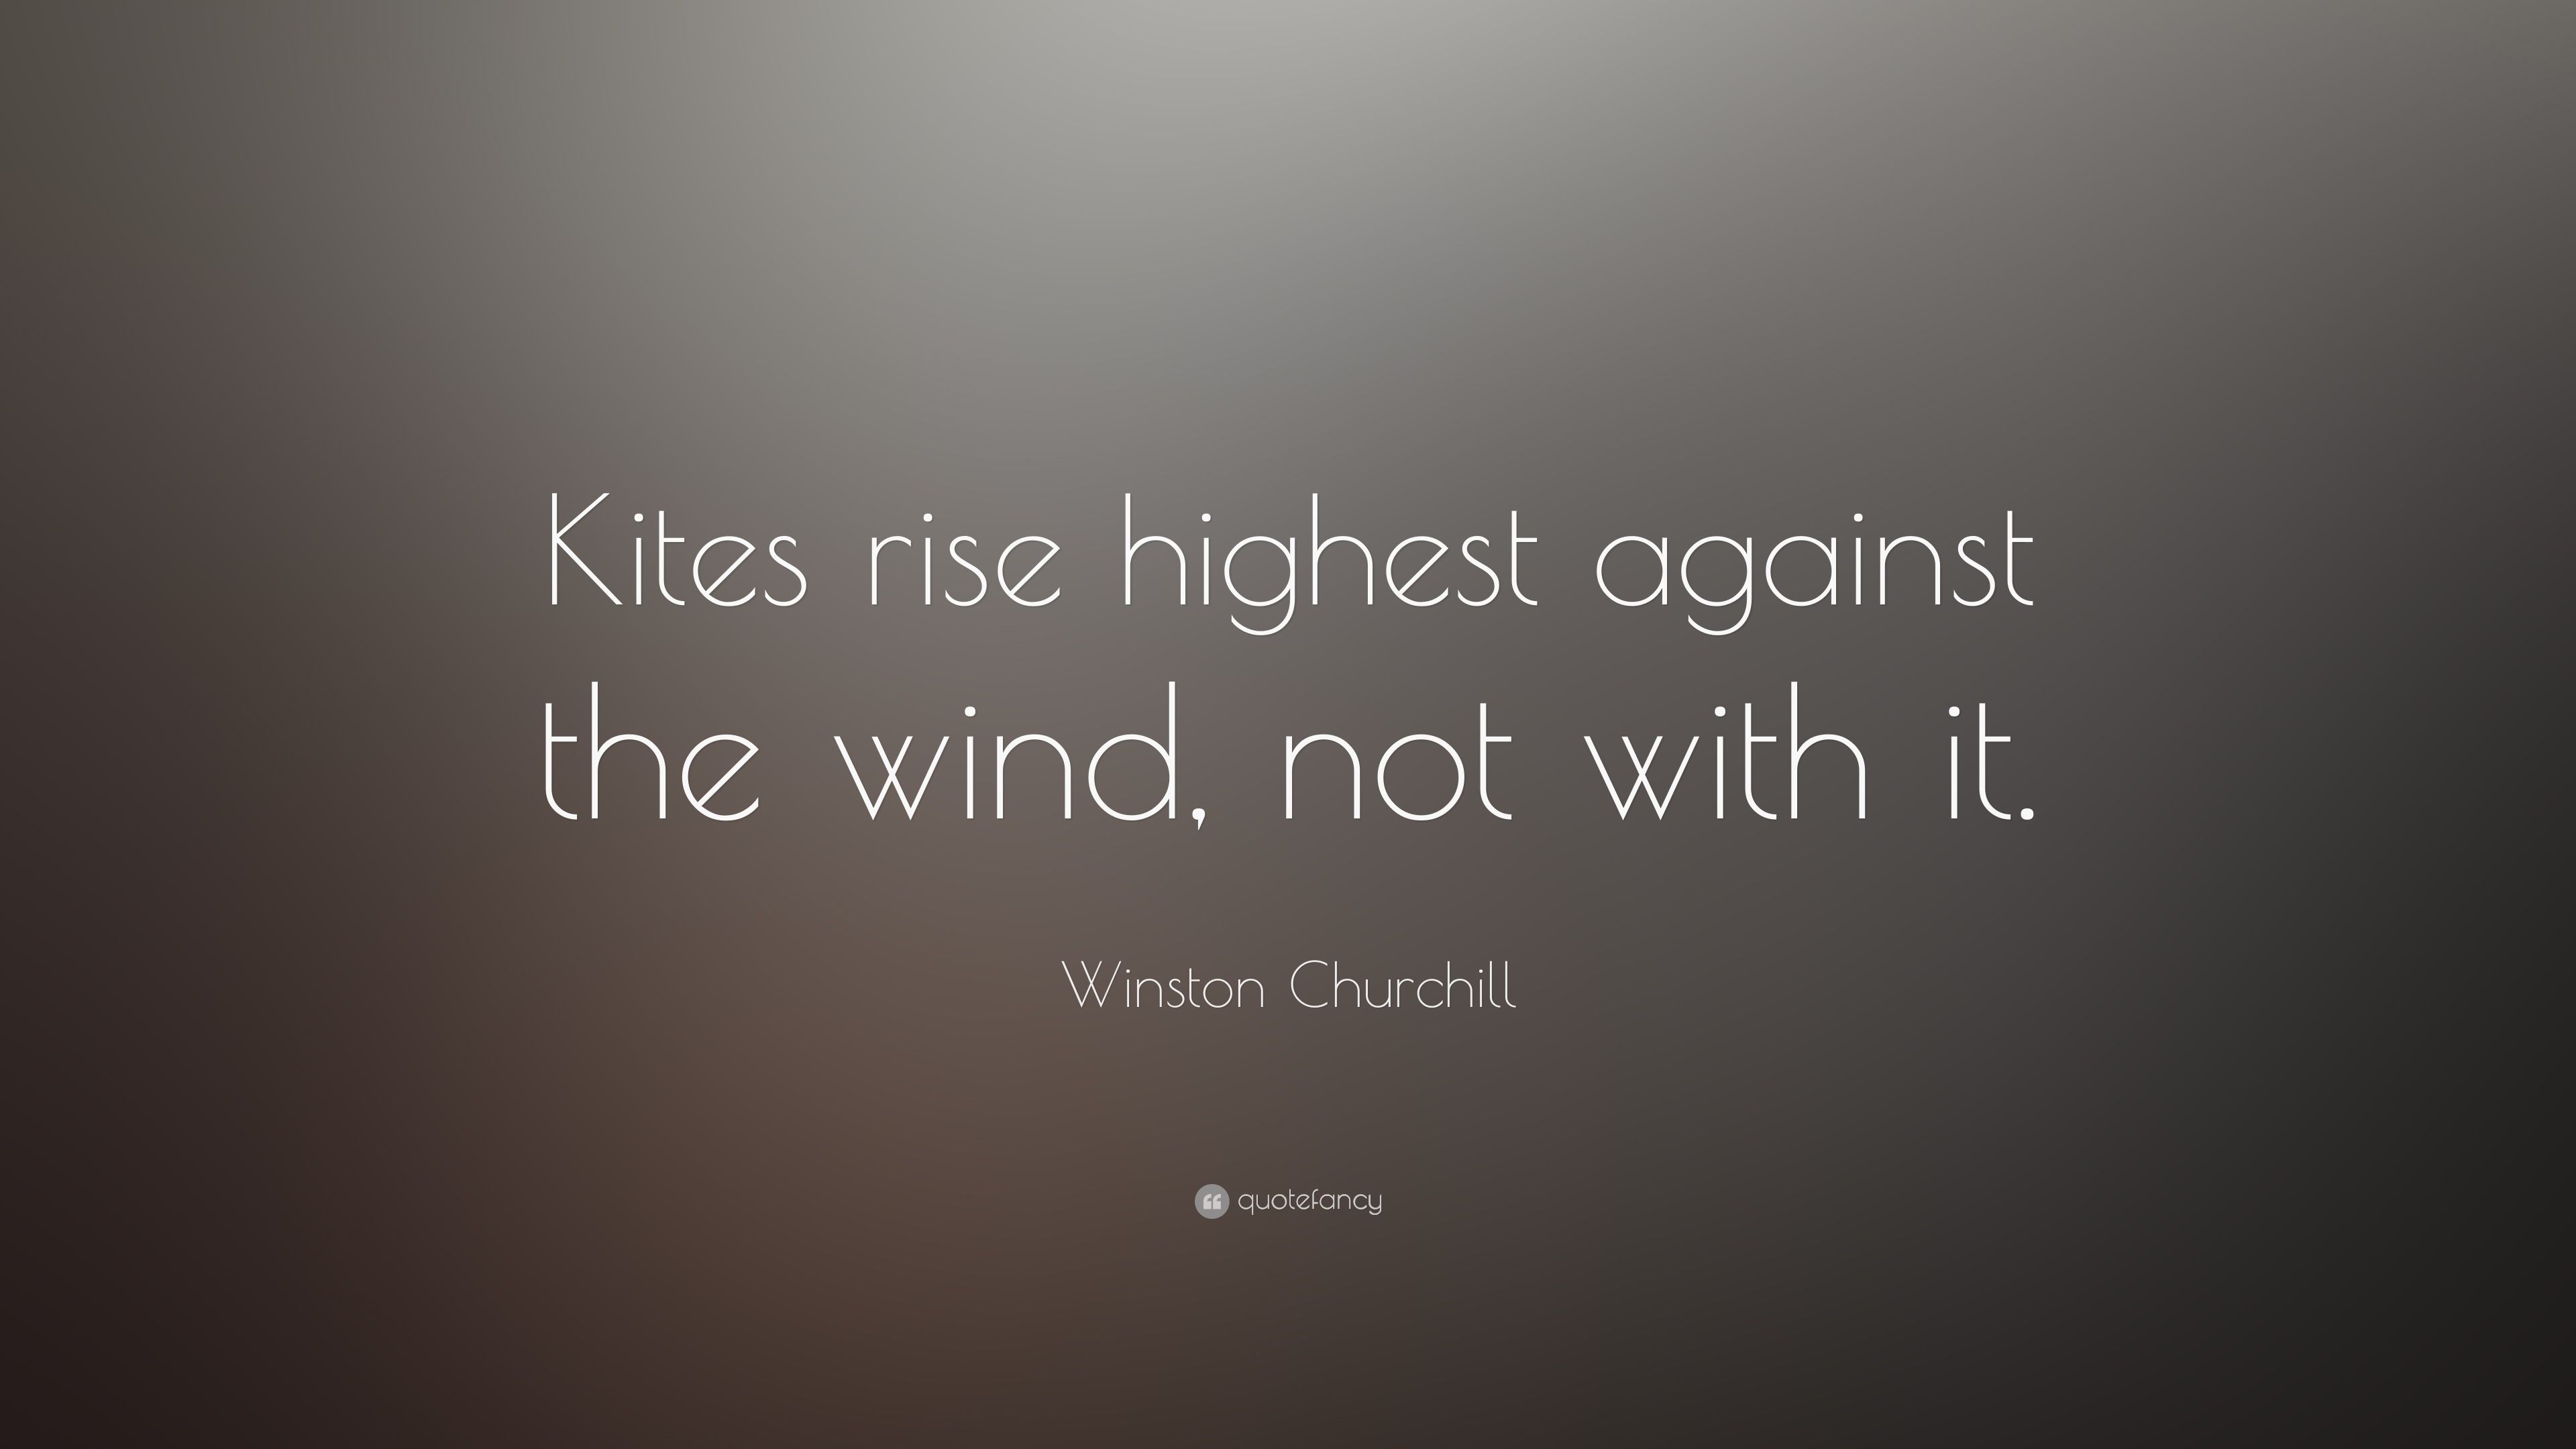 Winston Churchill Quote Kites rise highest against the wind, not